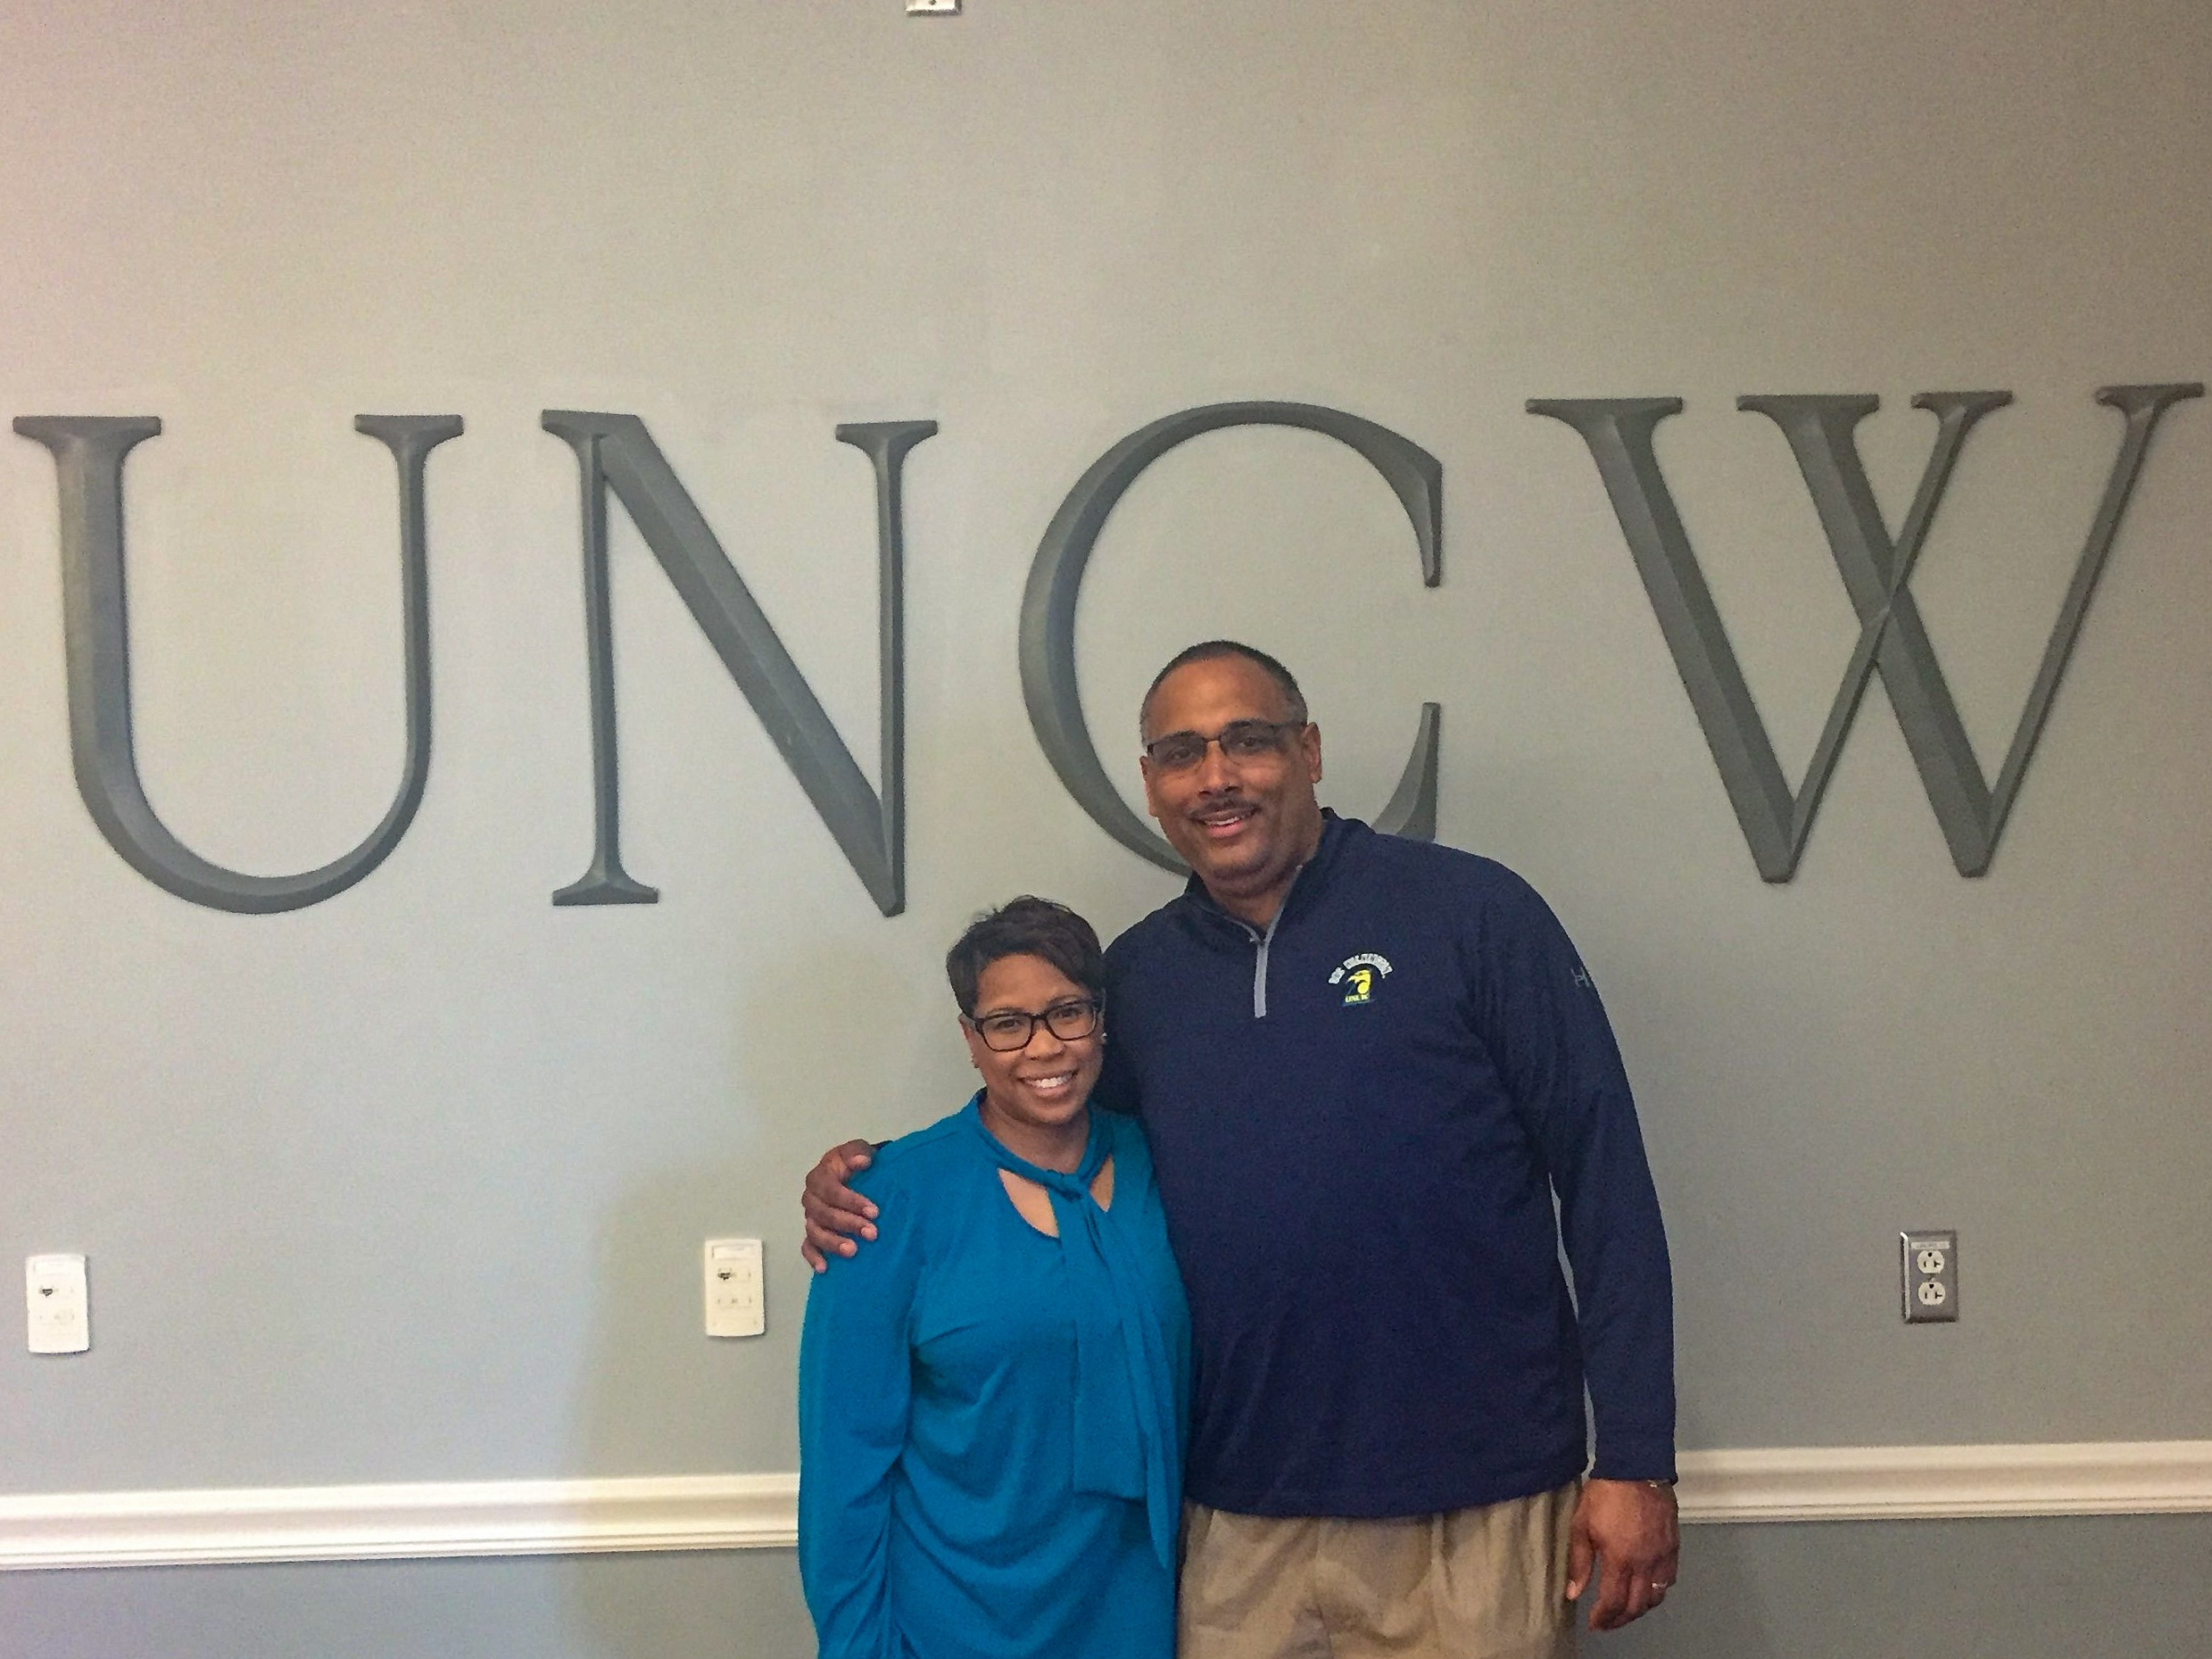 Vernon Johnson '91 with his wife Dr. Tina Ford-Johnson '91.